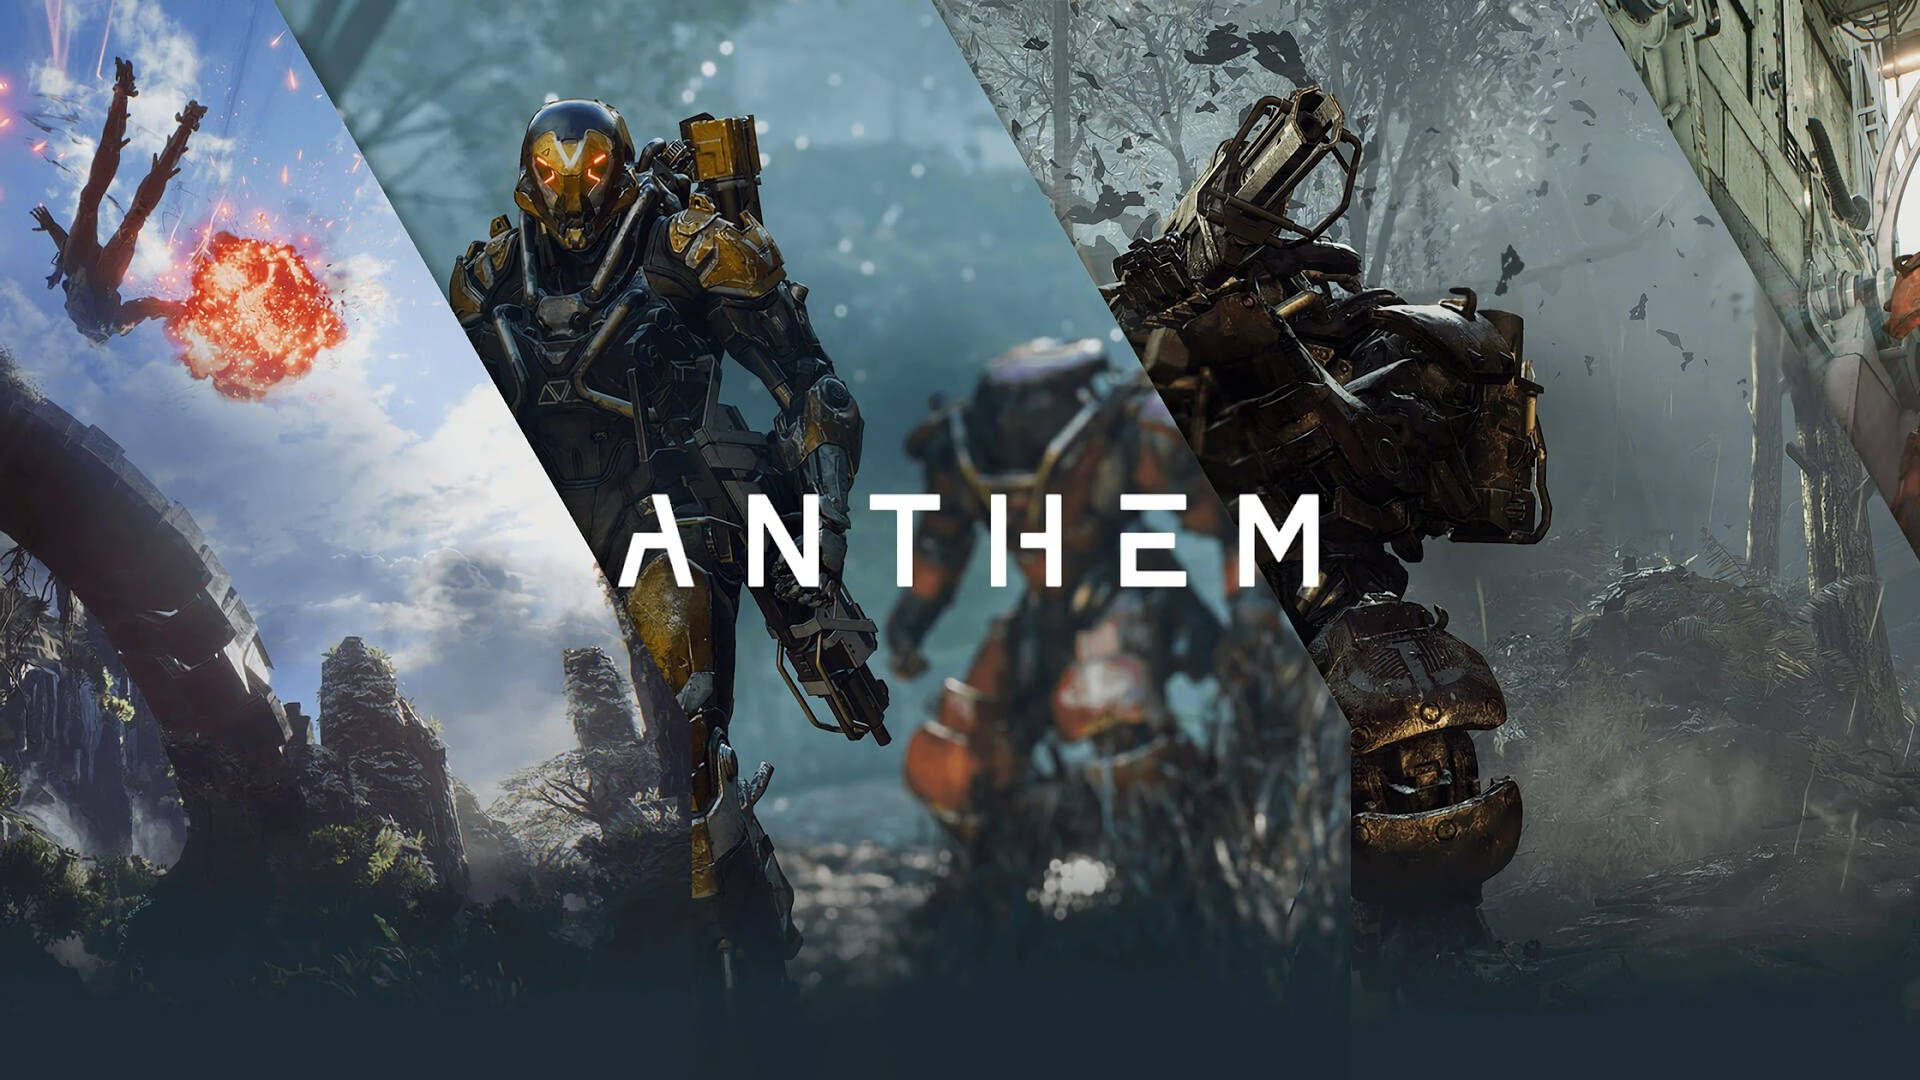 Immerse yourself in the world of Anthem in amazing 4K resolution. Wallpaper